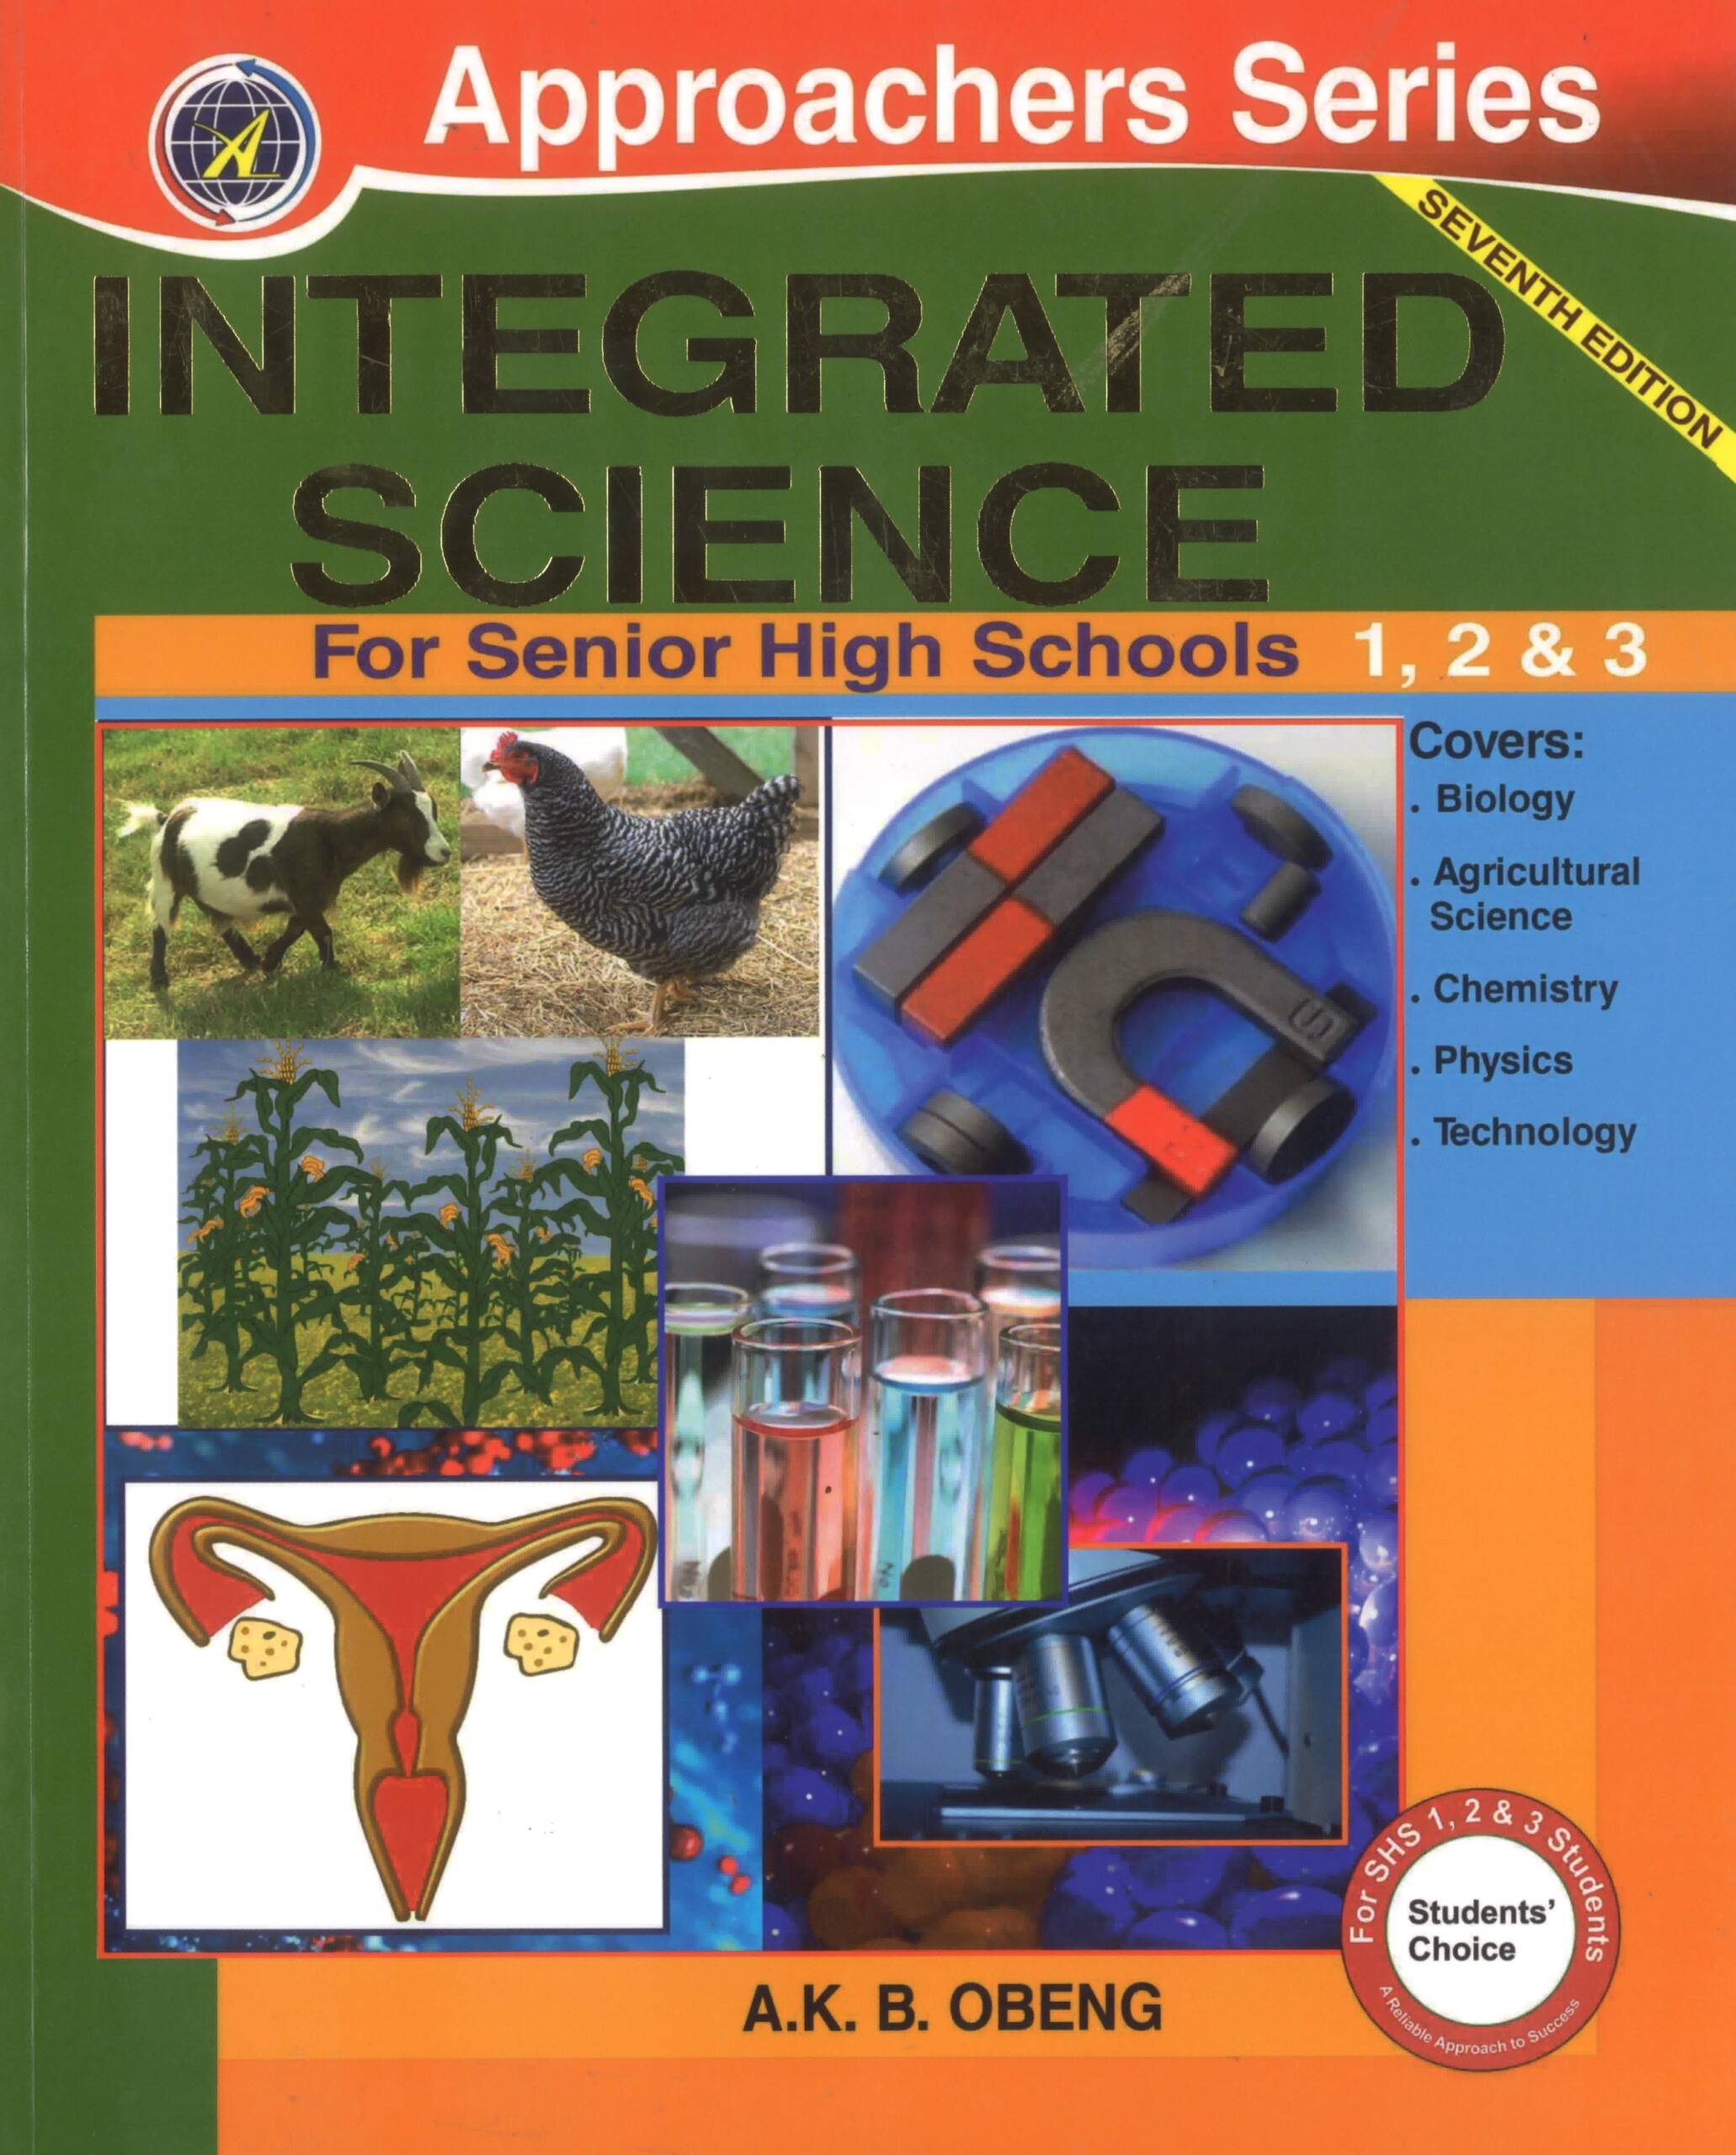 research topics in integrated science